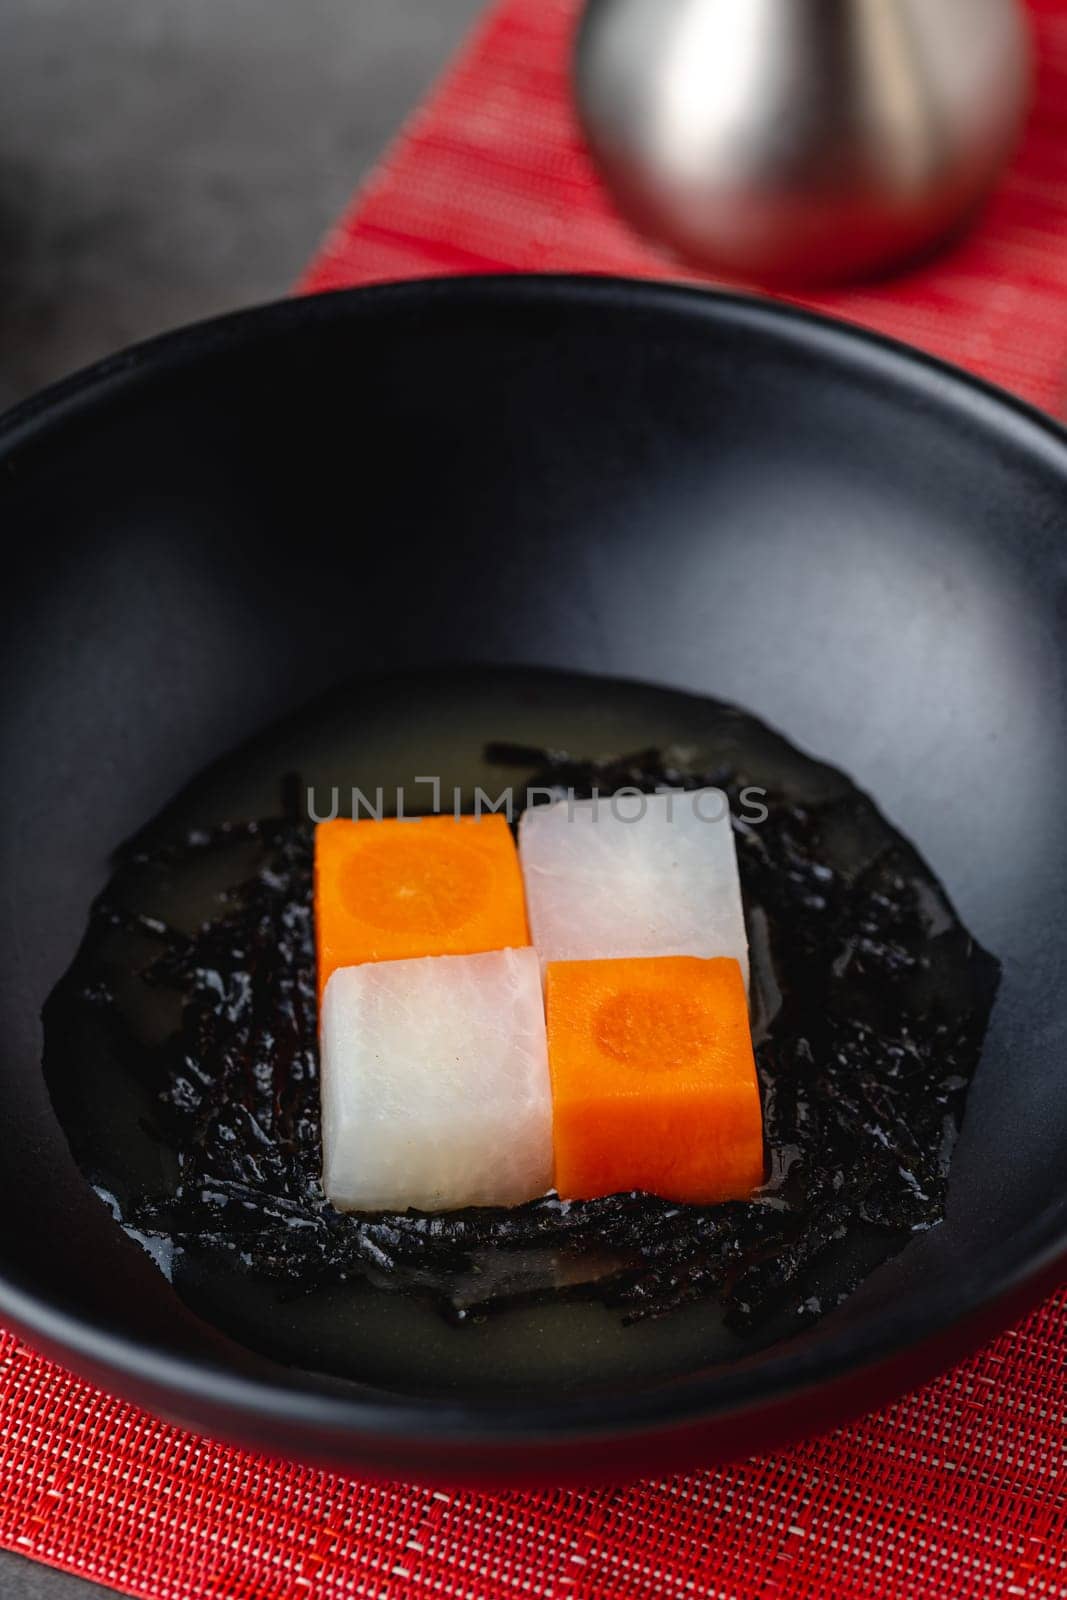 Kenchin Jiru, Japanese vegetable soup prepared with tofu and root vegetables by Sonat